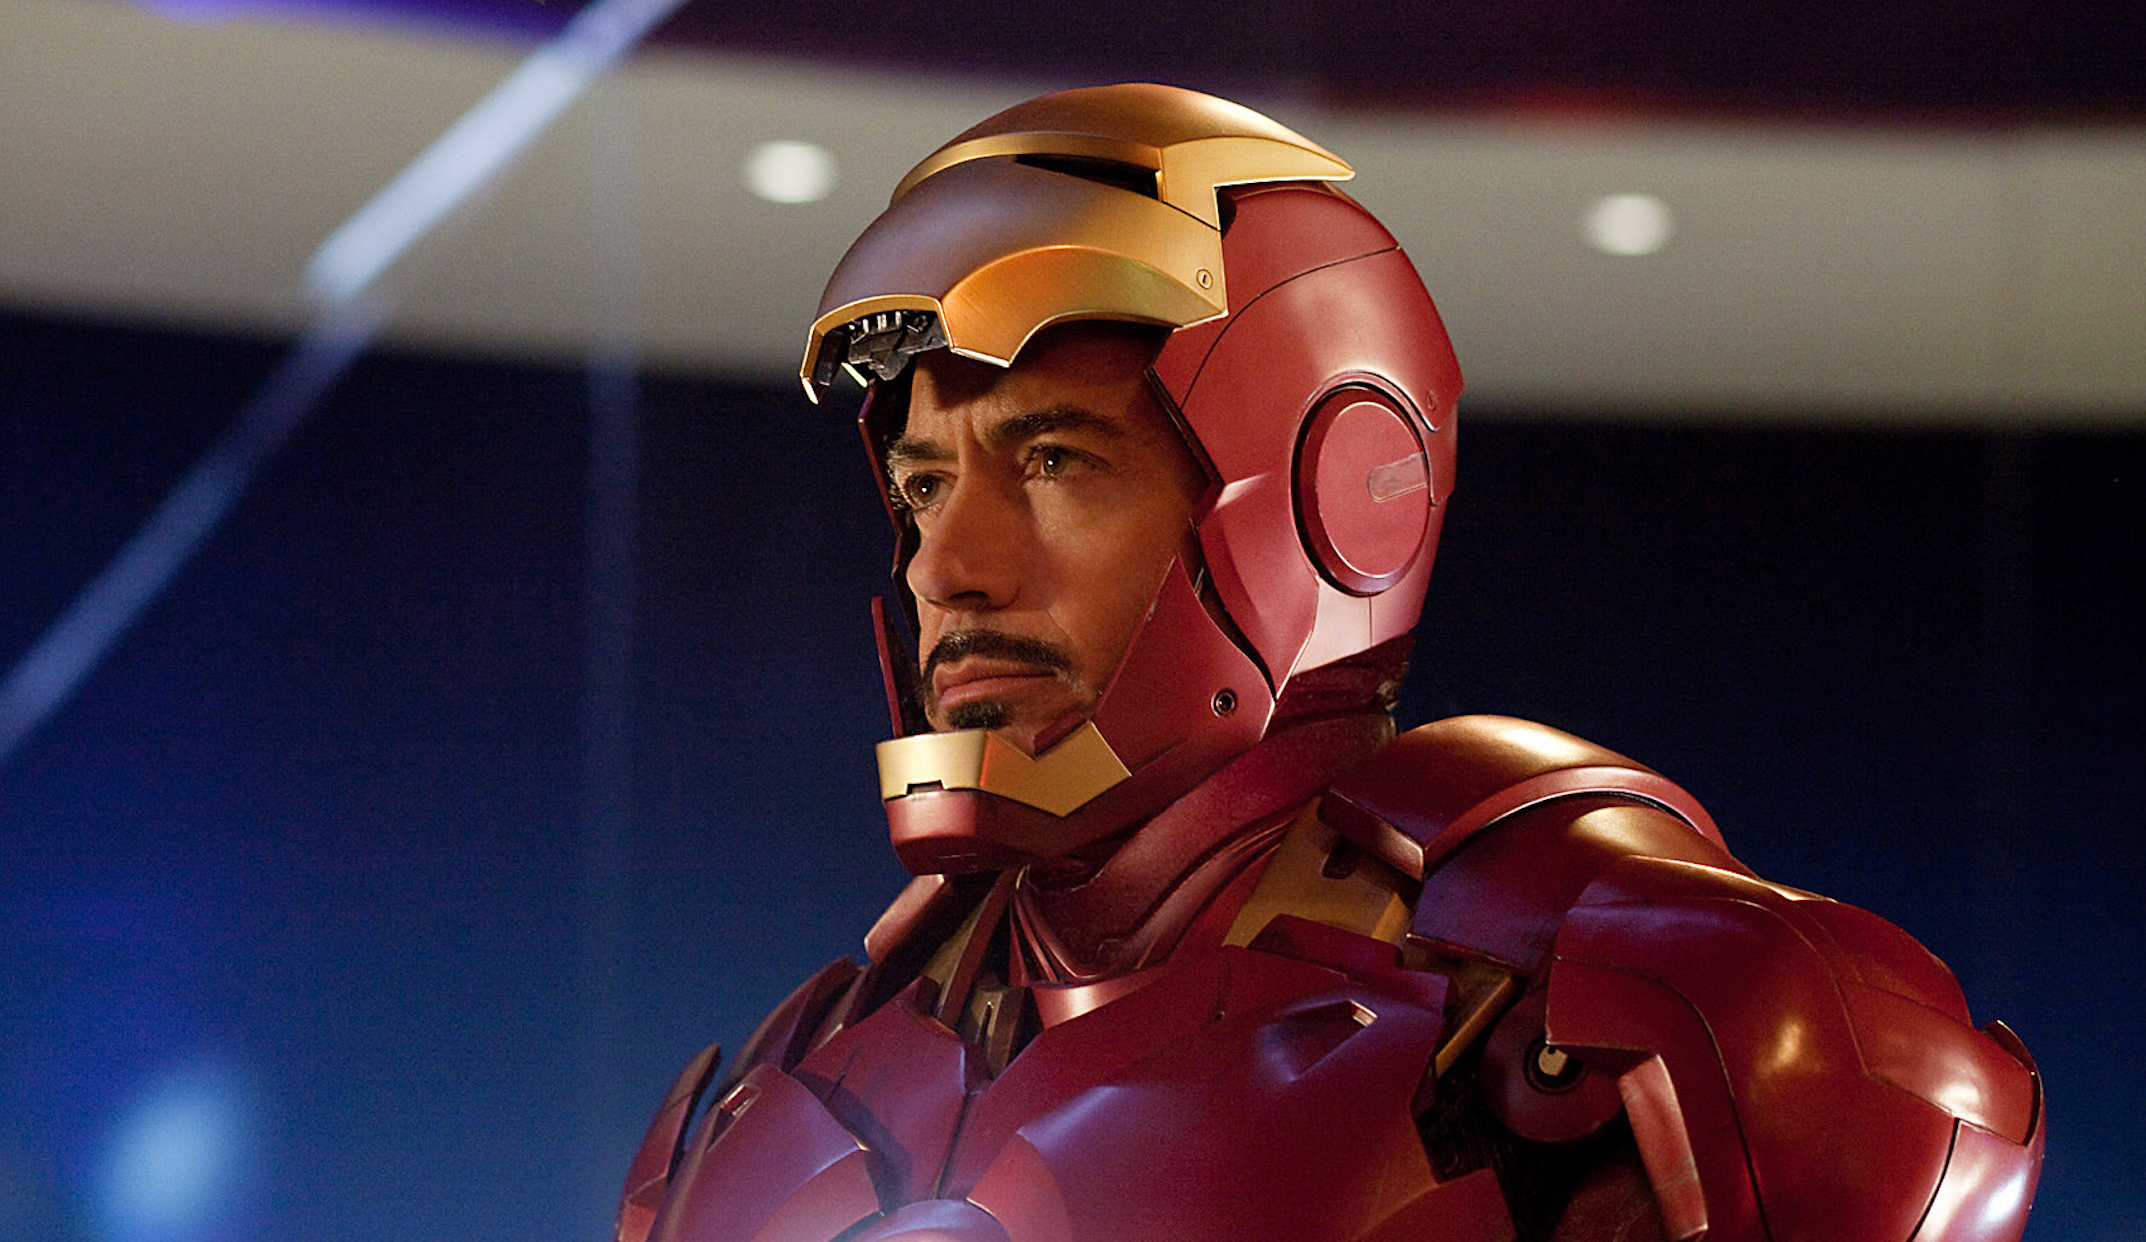 Downey in his Iron Man suit for the film, Iron Man (Credits: Variety)